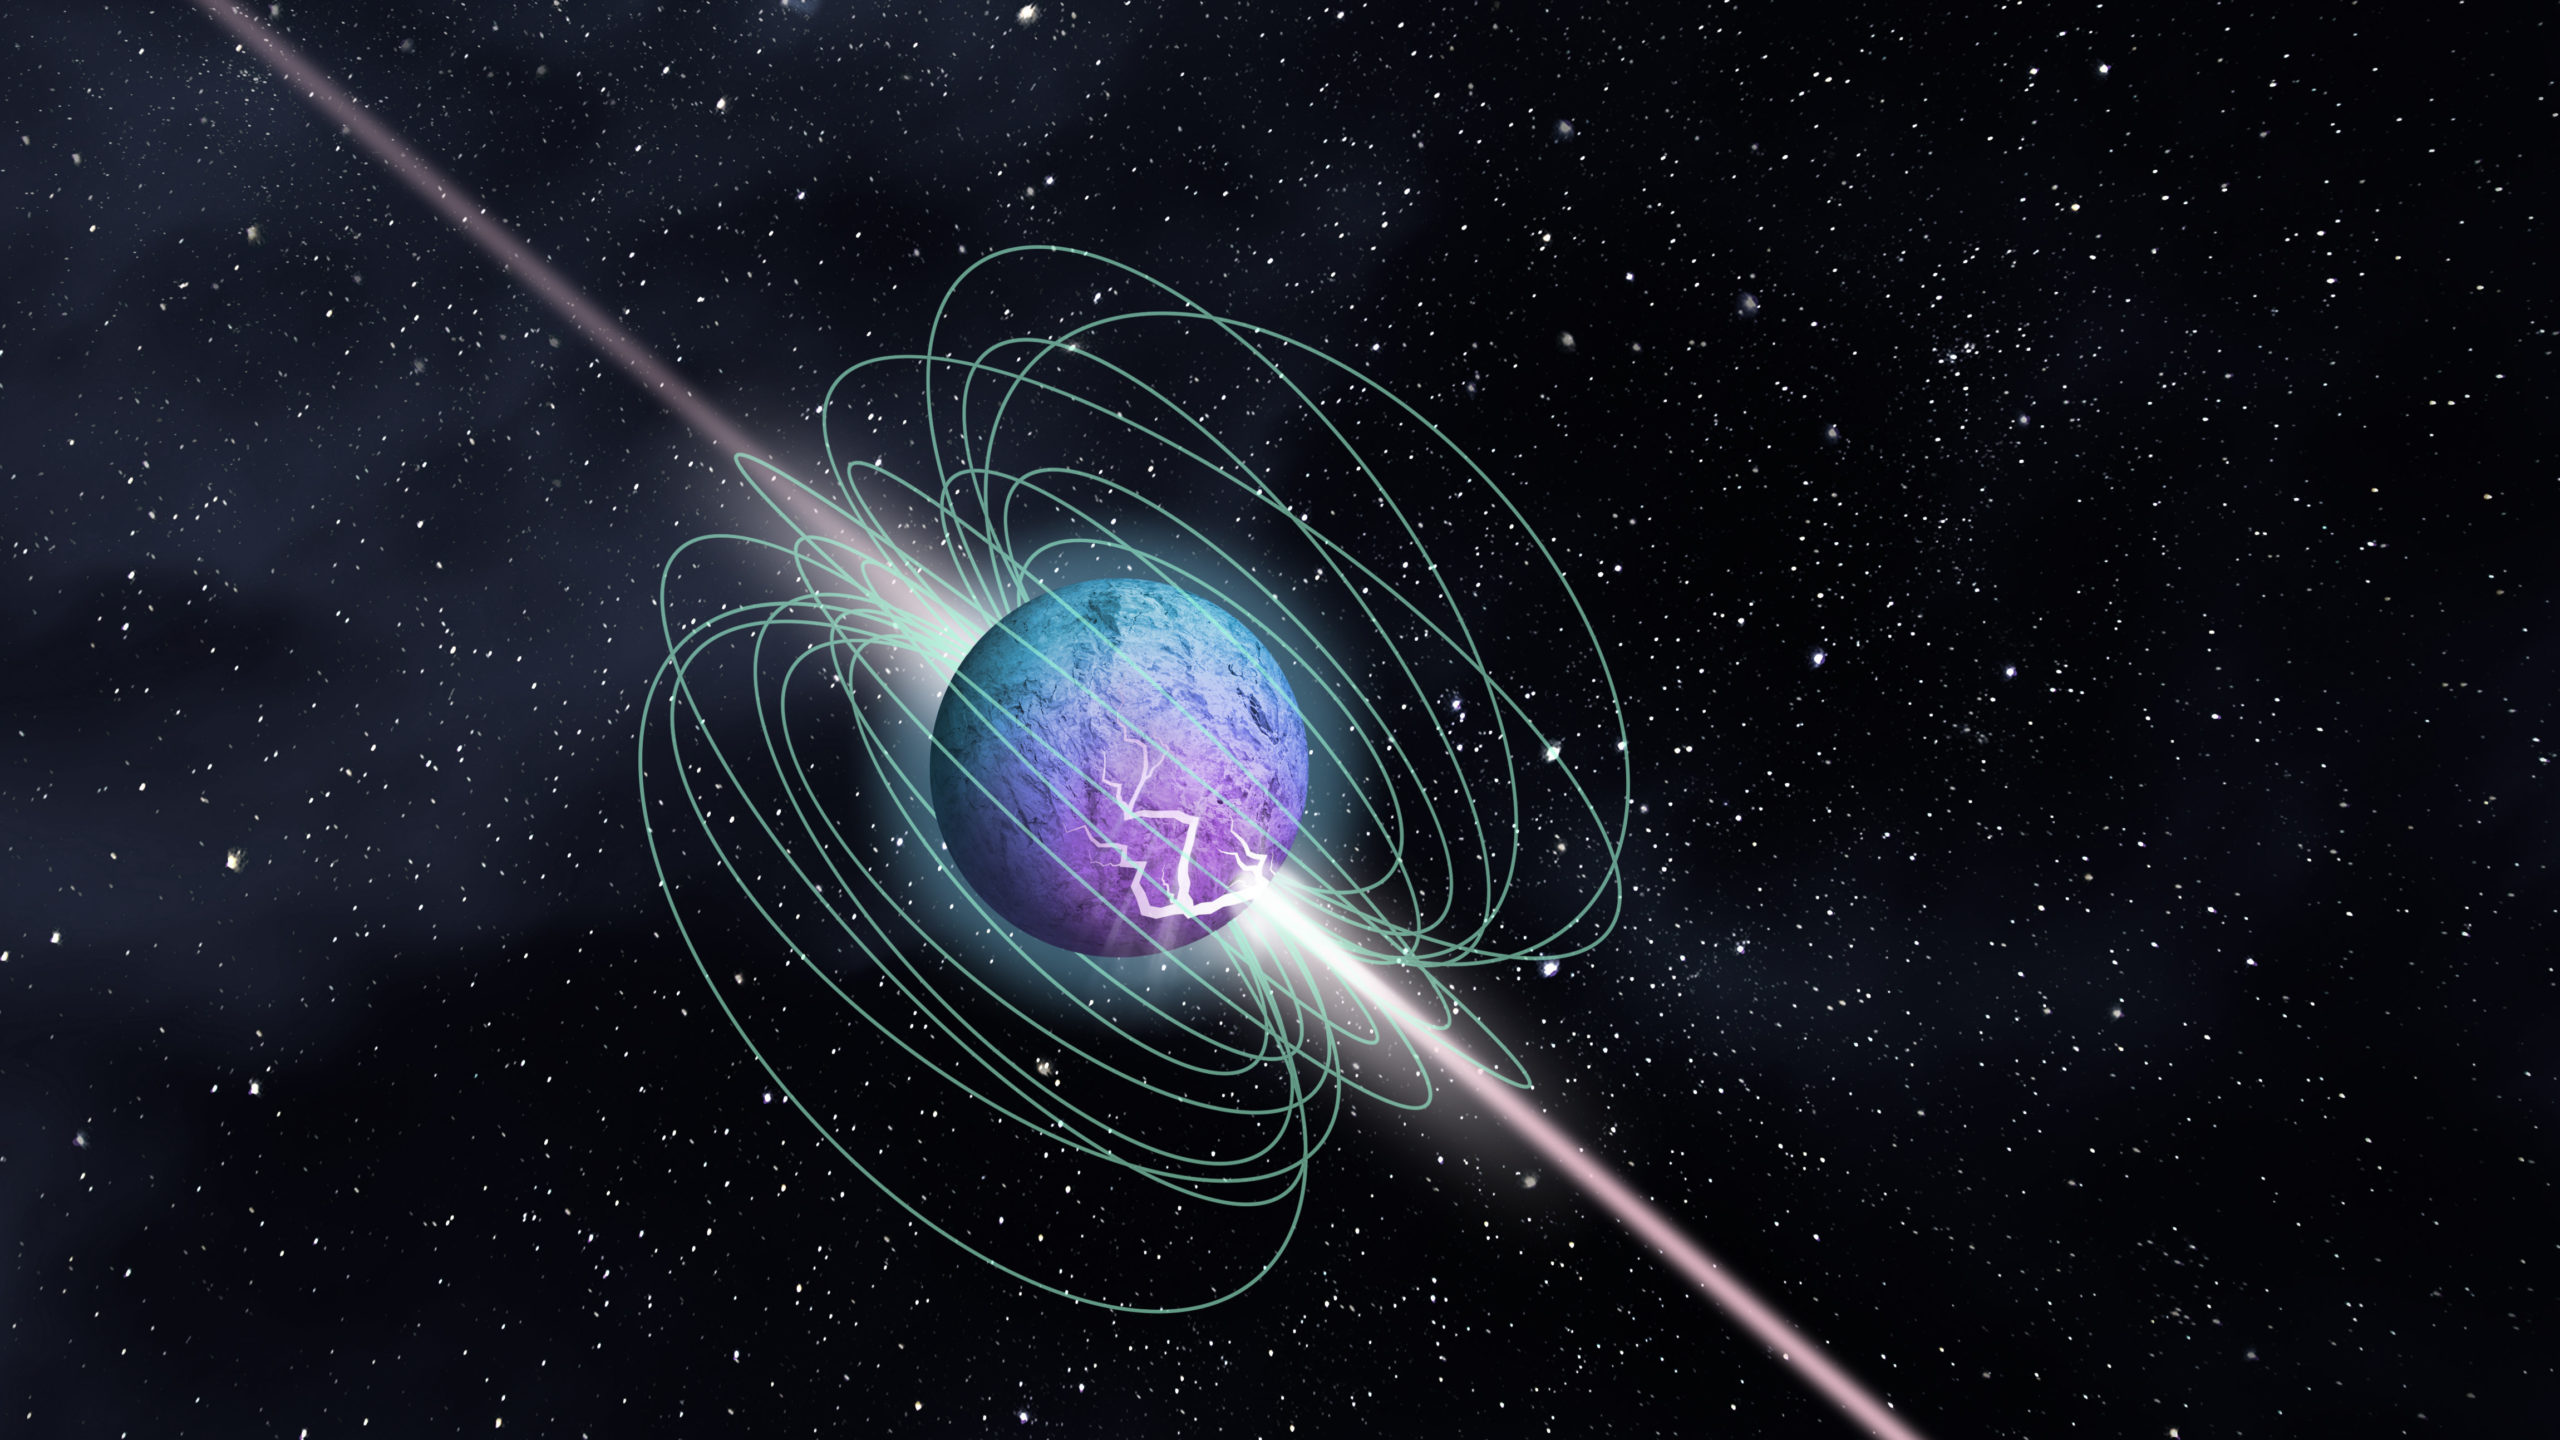 Artist's impression of a magnetar outburst, showing the object's magnetic field and bi-directional beamed emission, having burst out from a crust-cracking episode. (Image: McGill University Graphic Design Team)